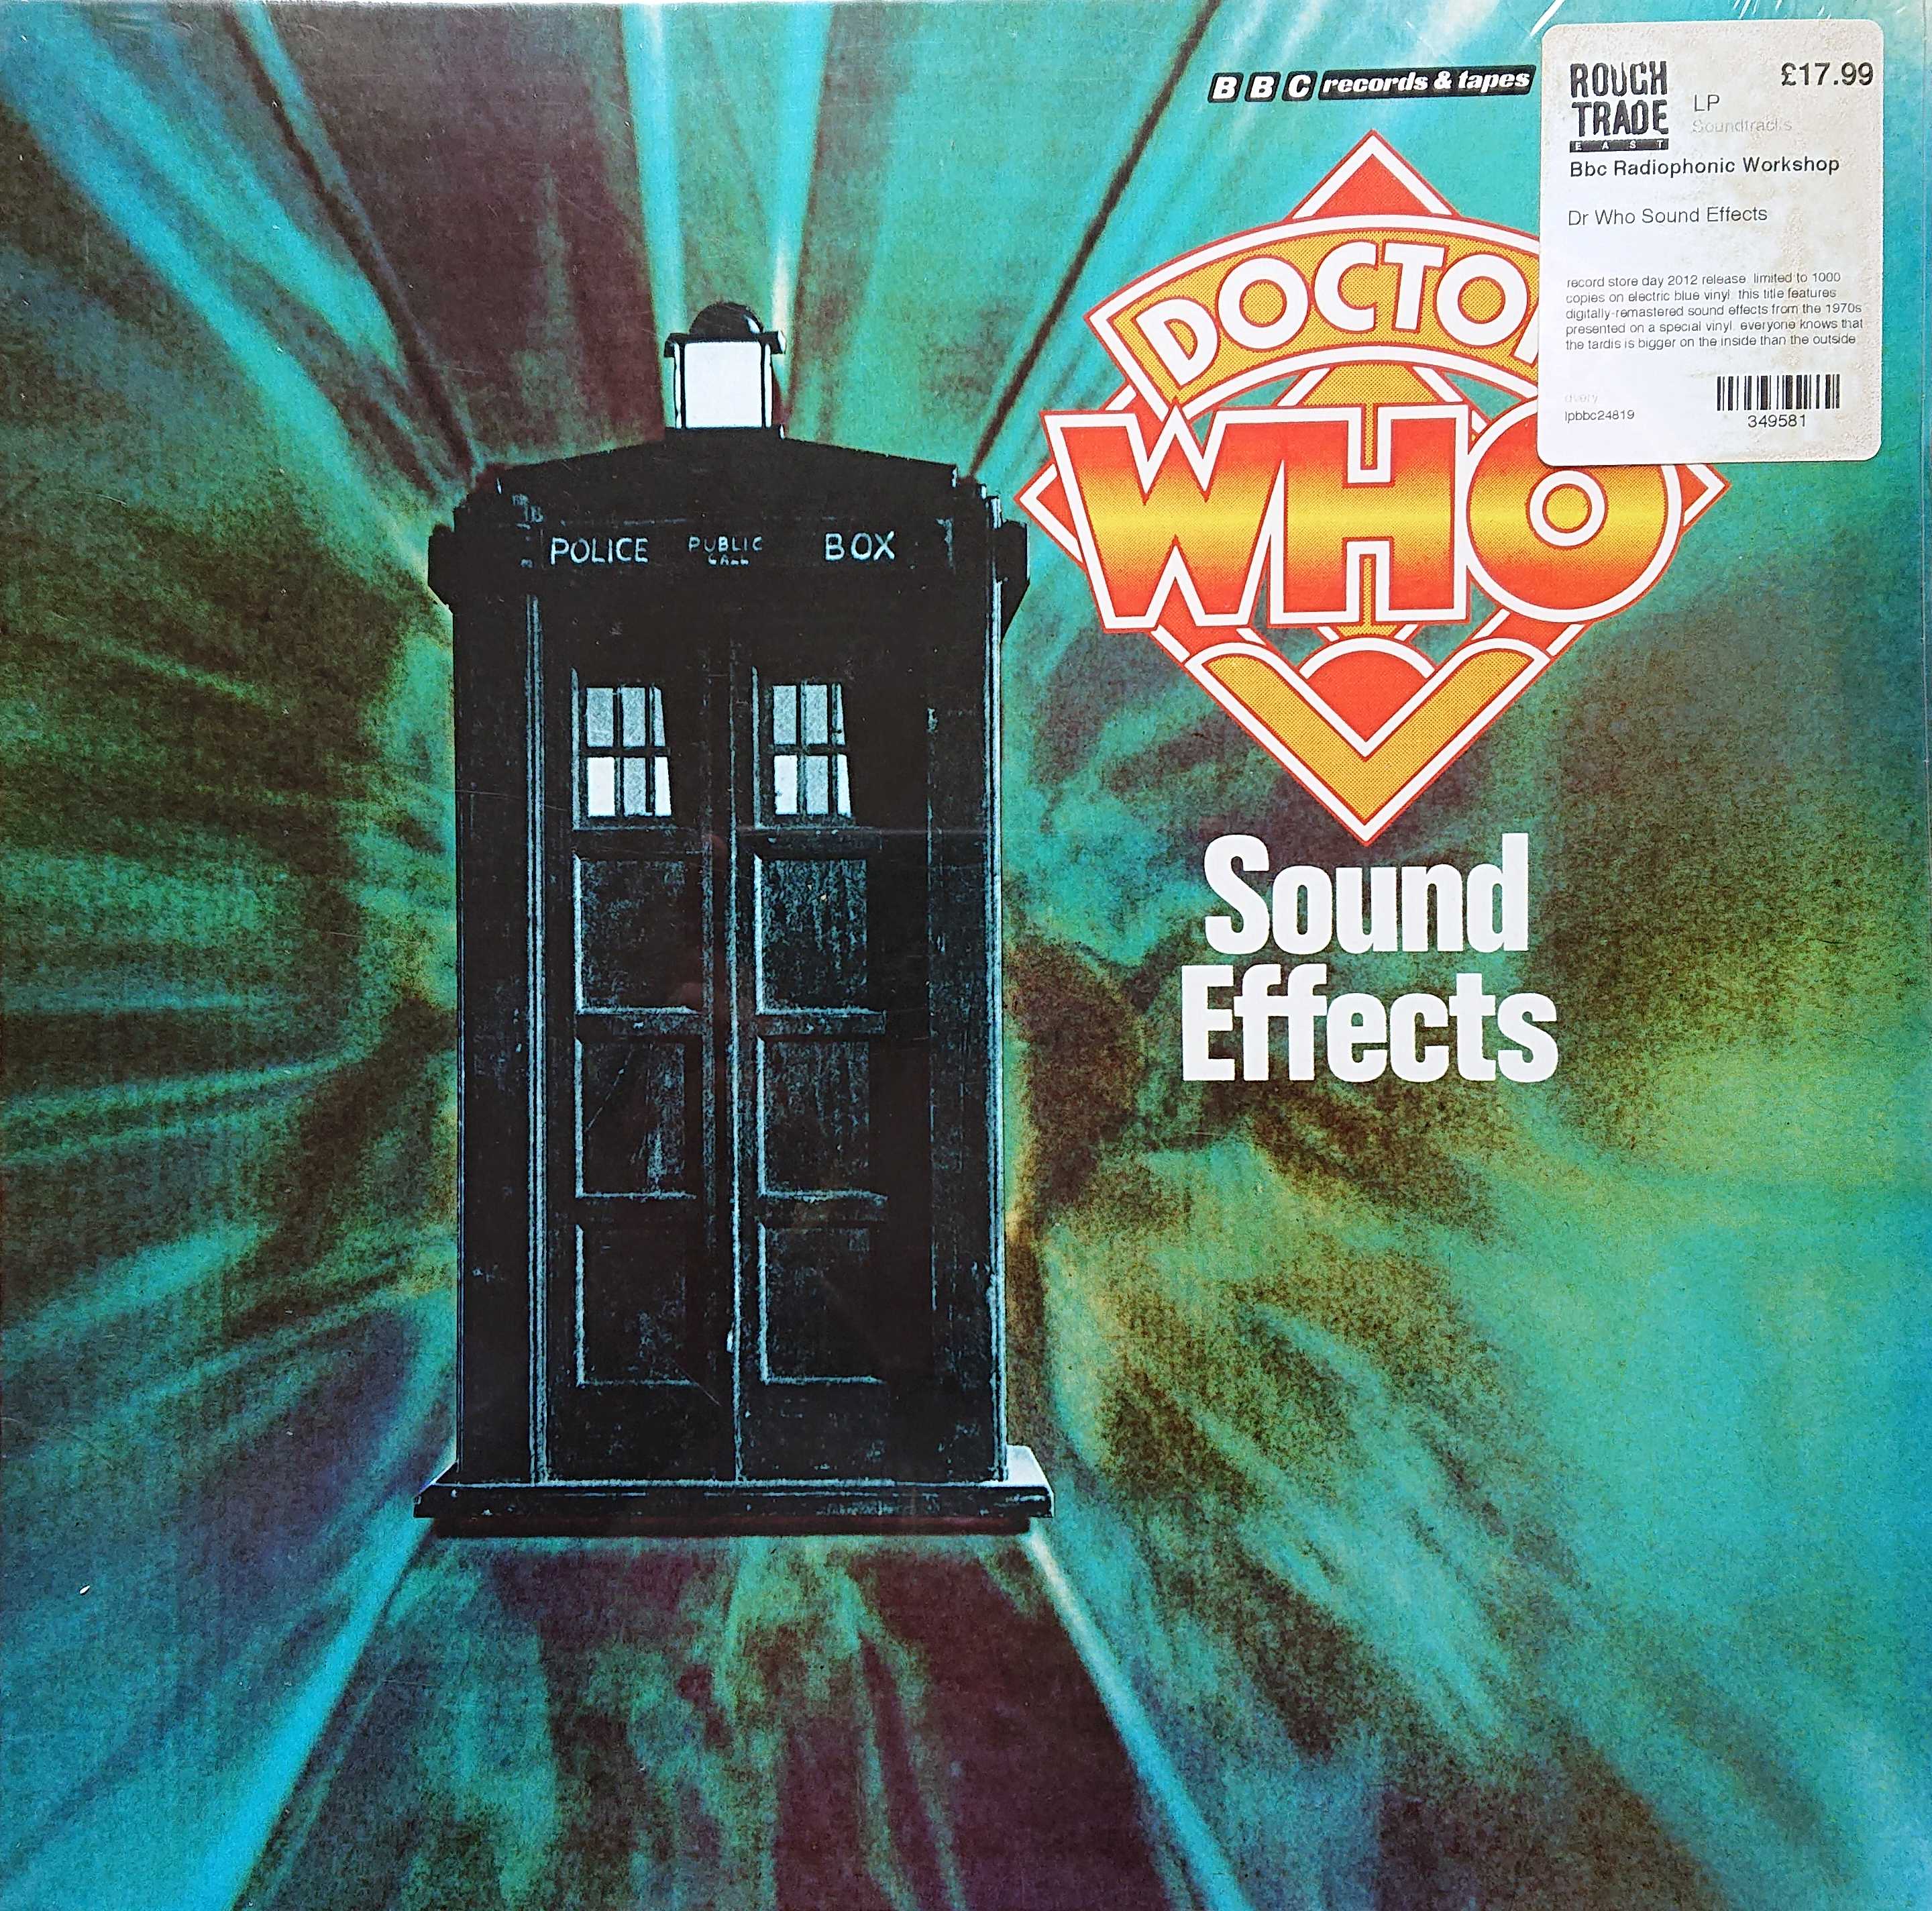 Picture of Doctor Who sound effects - Record Store Day 2012 by artist BBC radiophonic workshop from the BBC albums - Records and Tapes library